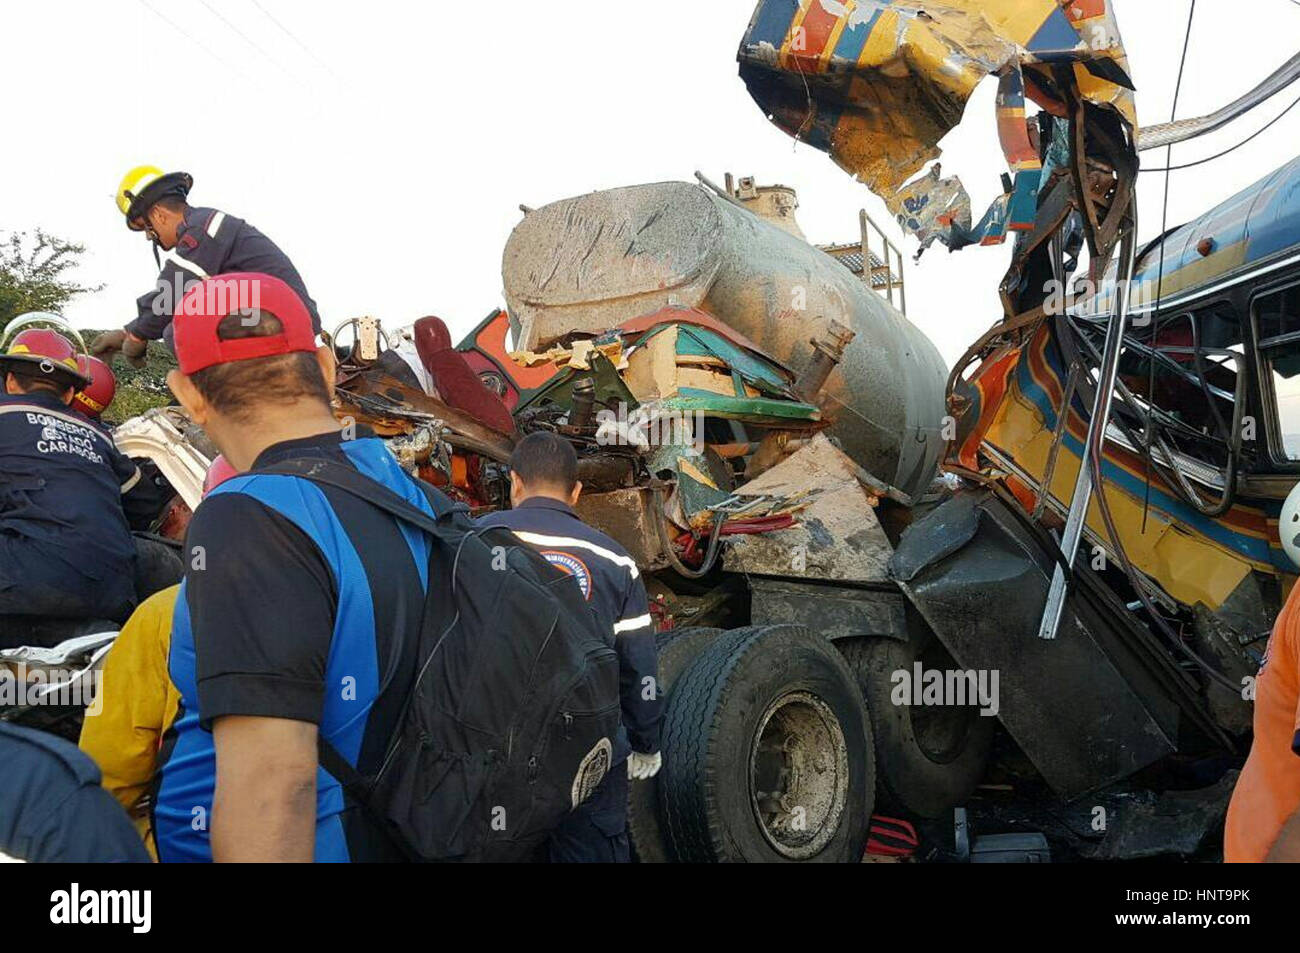 Carabobo, Venezuela. 16th February 2017. Members of rescue teams work at the site of a collision between a bus and a heavy-duty vehicle on the Guigue-Valencia highway in the state of Carabobo, Venezuela, on Feb. 16, 2017. The frontal collision between a passenger bus and a heavy-duty vehicle on Thursday caused at least 16 killed and other 50 injured, according to the local press. Credit: Xinhua/Alamy Live News Stock Photo